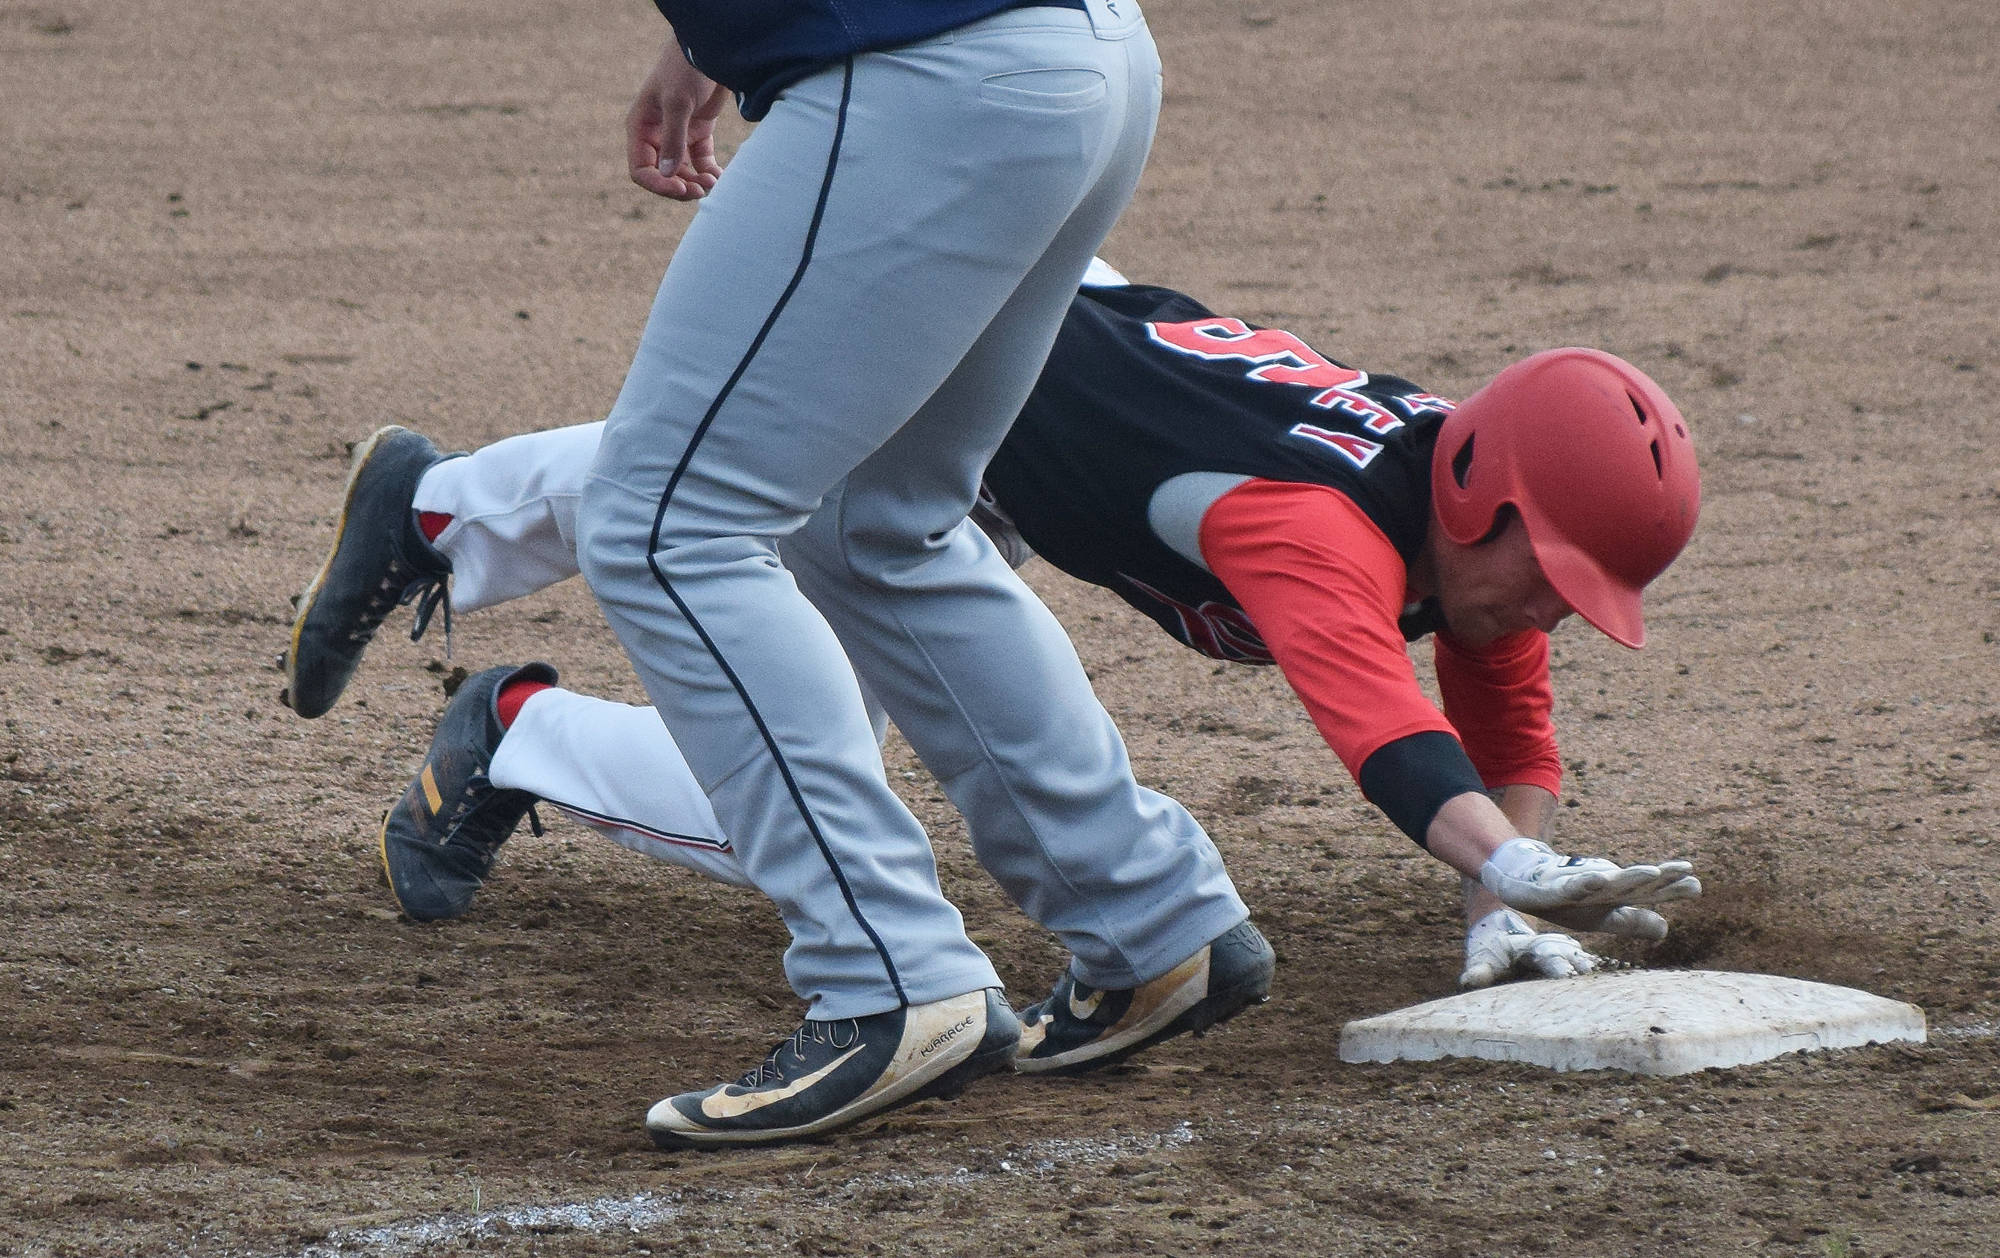 Peninsula Oilers runner Evan Berkey dives back to first ahead of the tag from Chugiak/Eagle River first baseman Nick Kreutzer, Friday night at Coral Seymour Memorial Park in Kenai. (Photo by Joey Klecka/Peninsula Clarion)